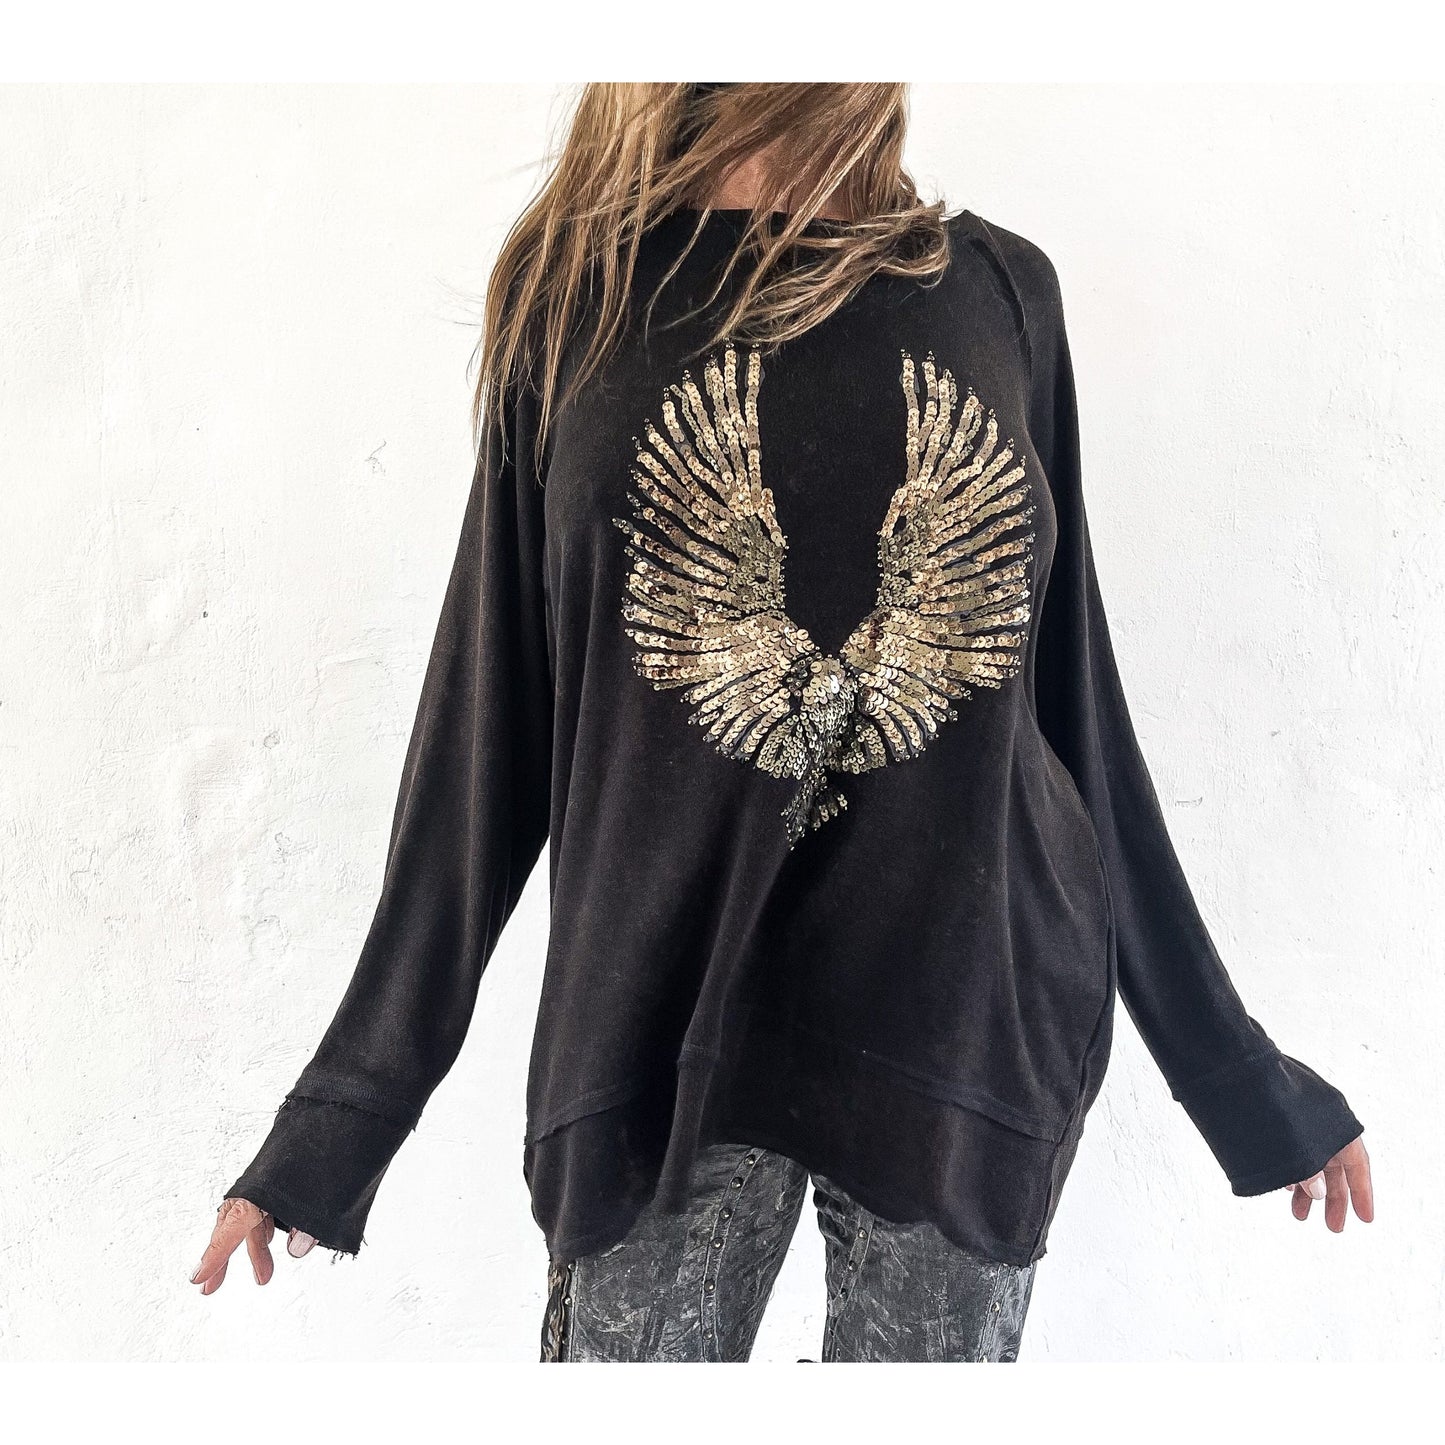 Adine & Co Phoenix Sweatshirt - Black EMAIL US FOR A SPECIAL ORDER ON YOUR SIZE  Adine & Co Pisces Boutique